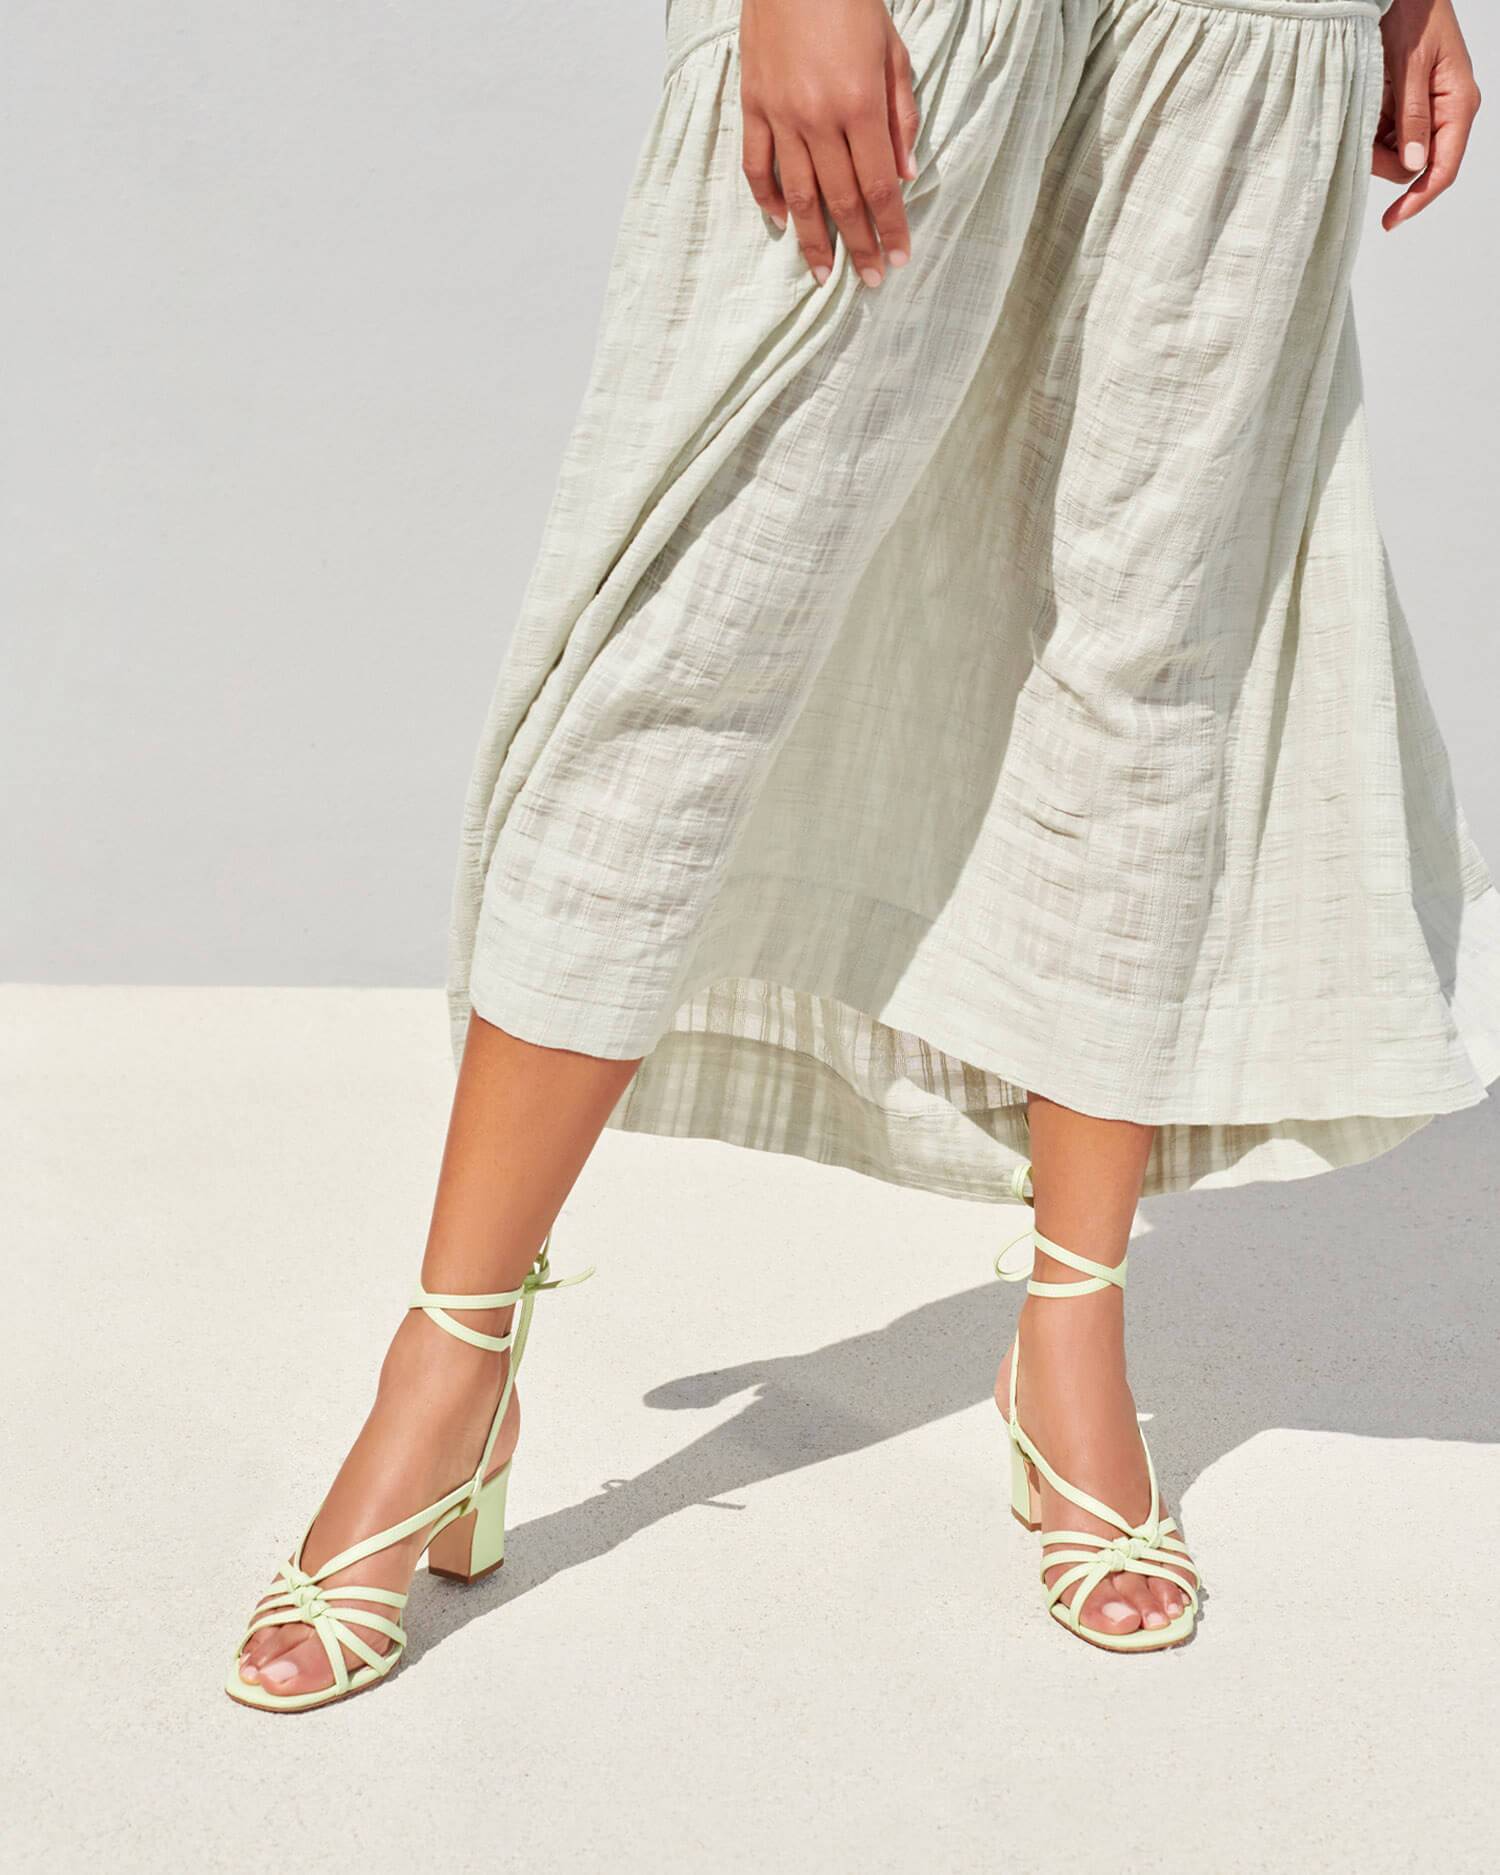 Loeffler Randall | Libby Knotted Wrap 